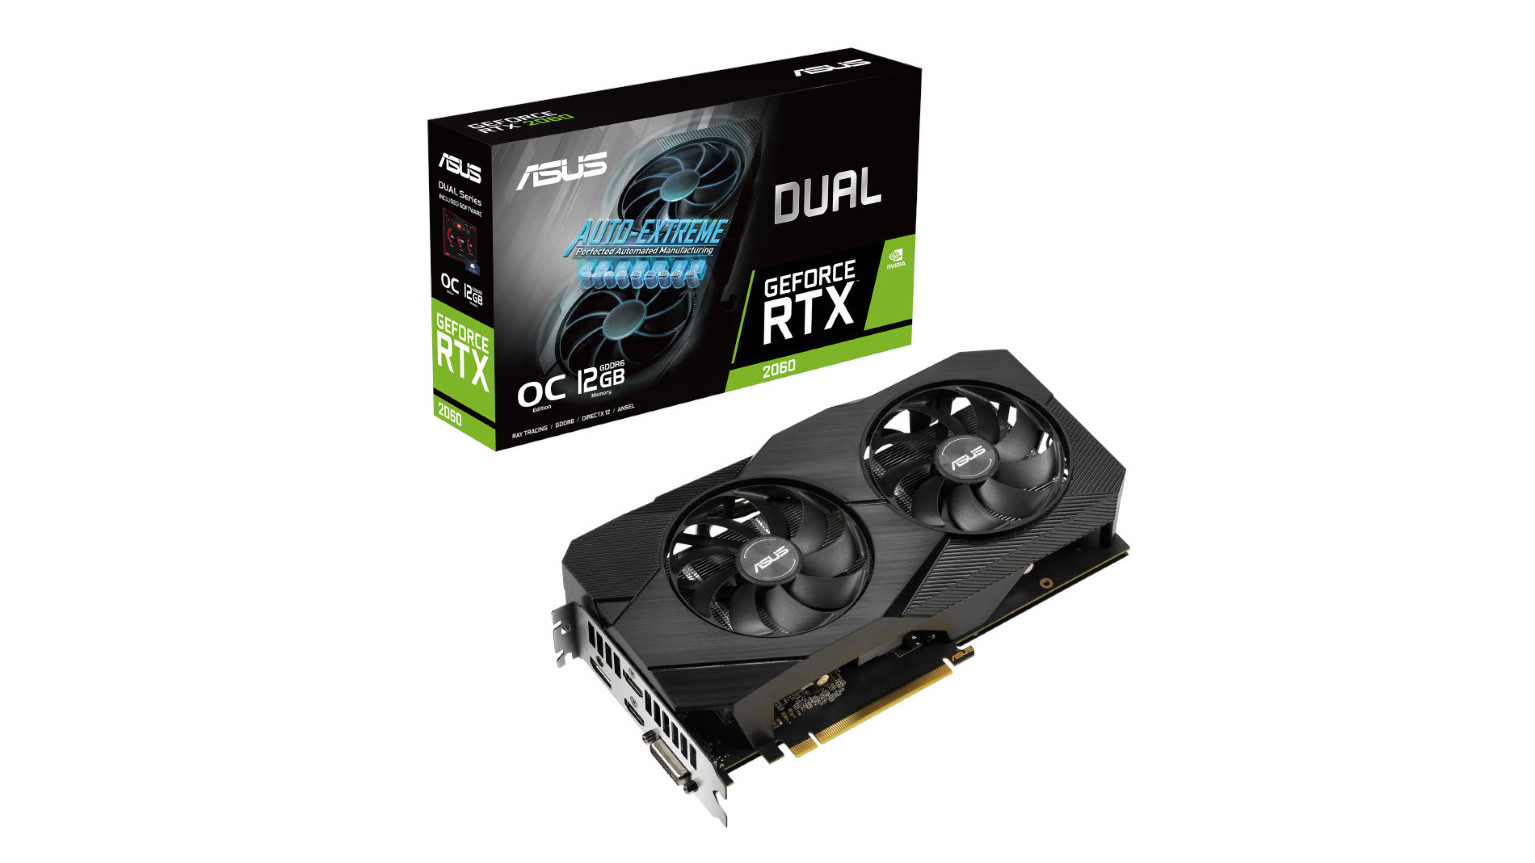 Asus Dual RTX 2060 12GB graphics card shown with box